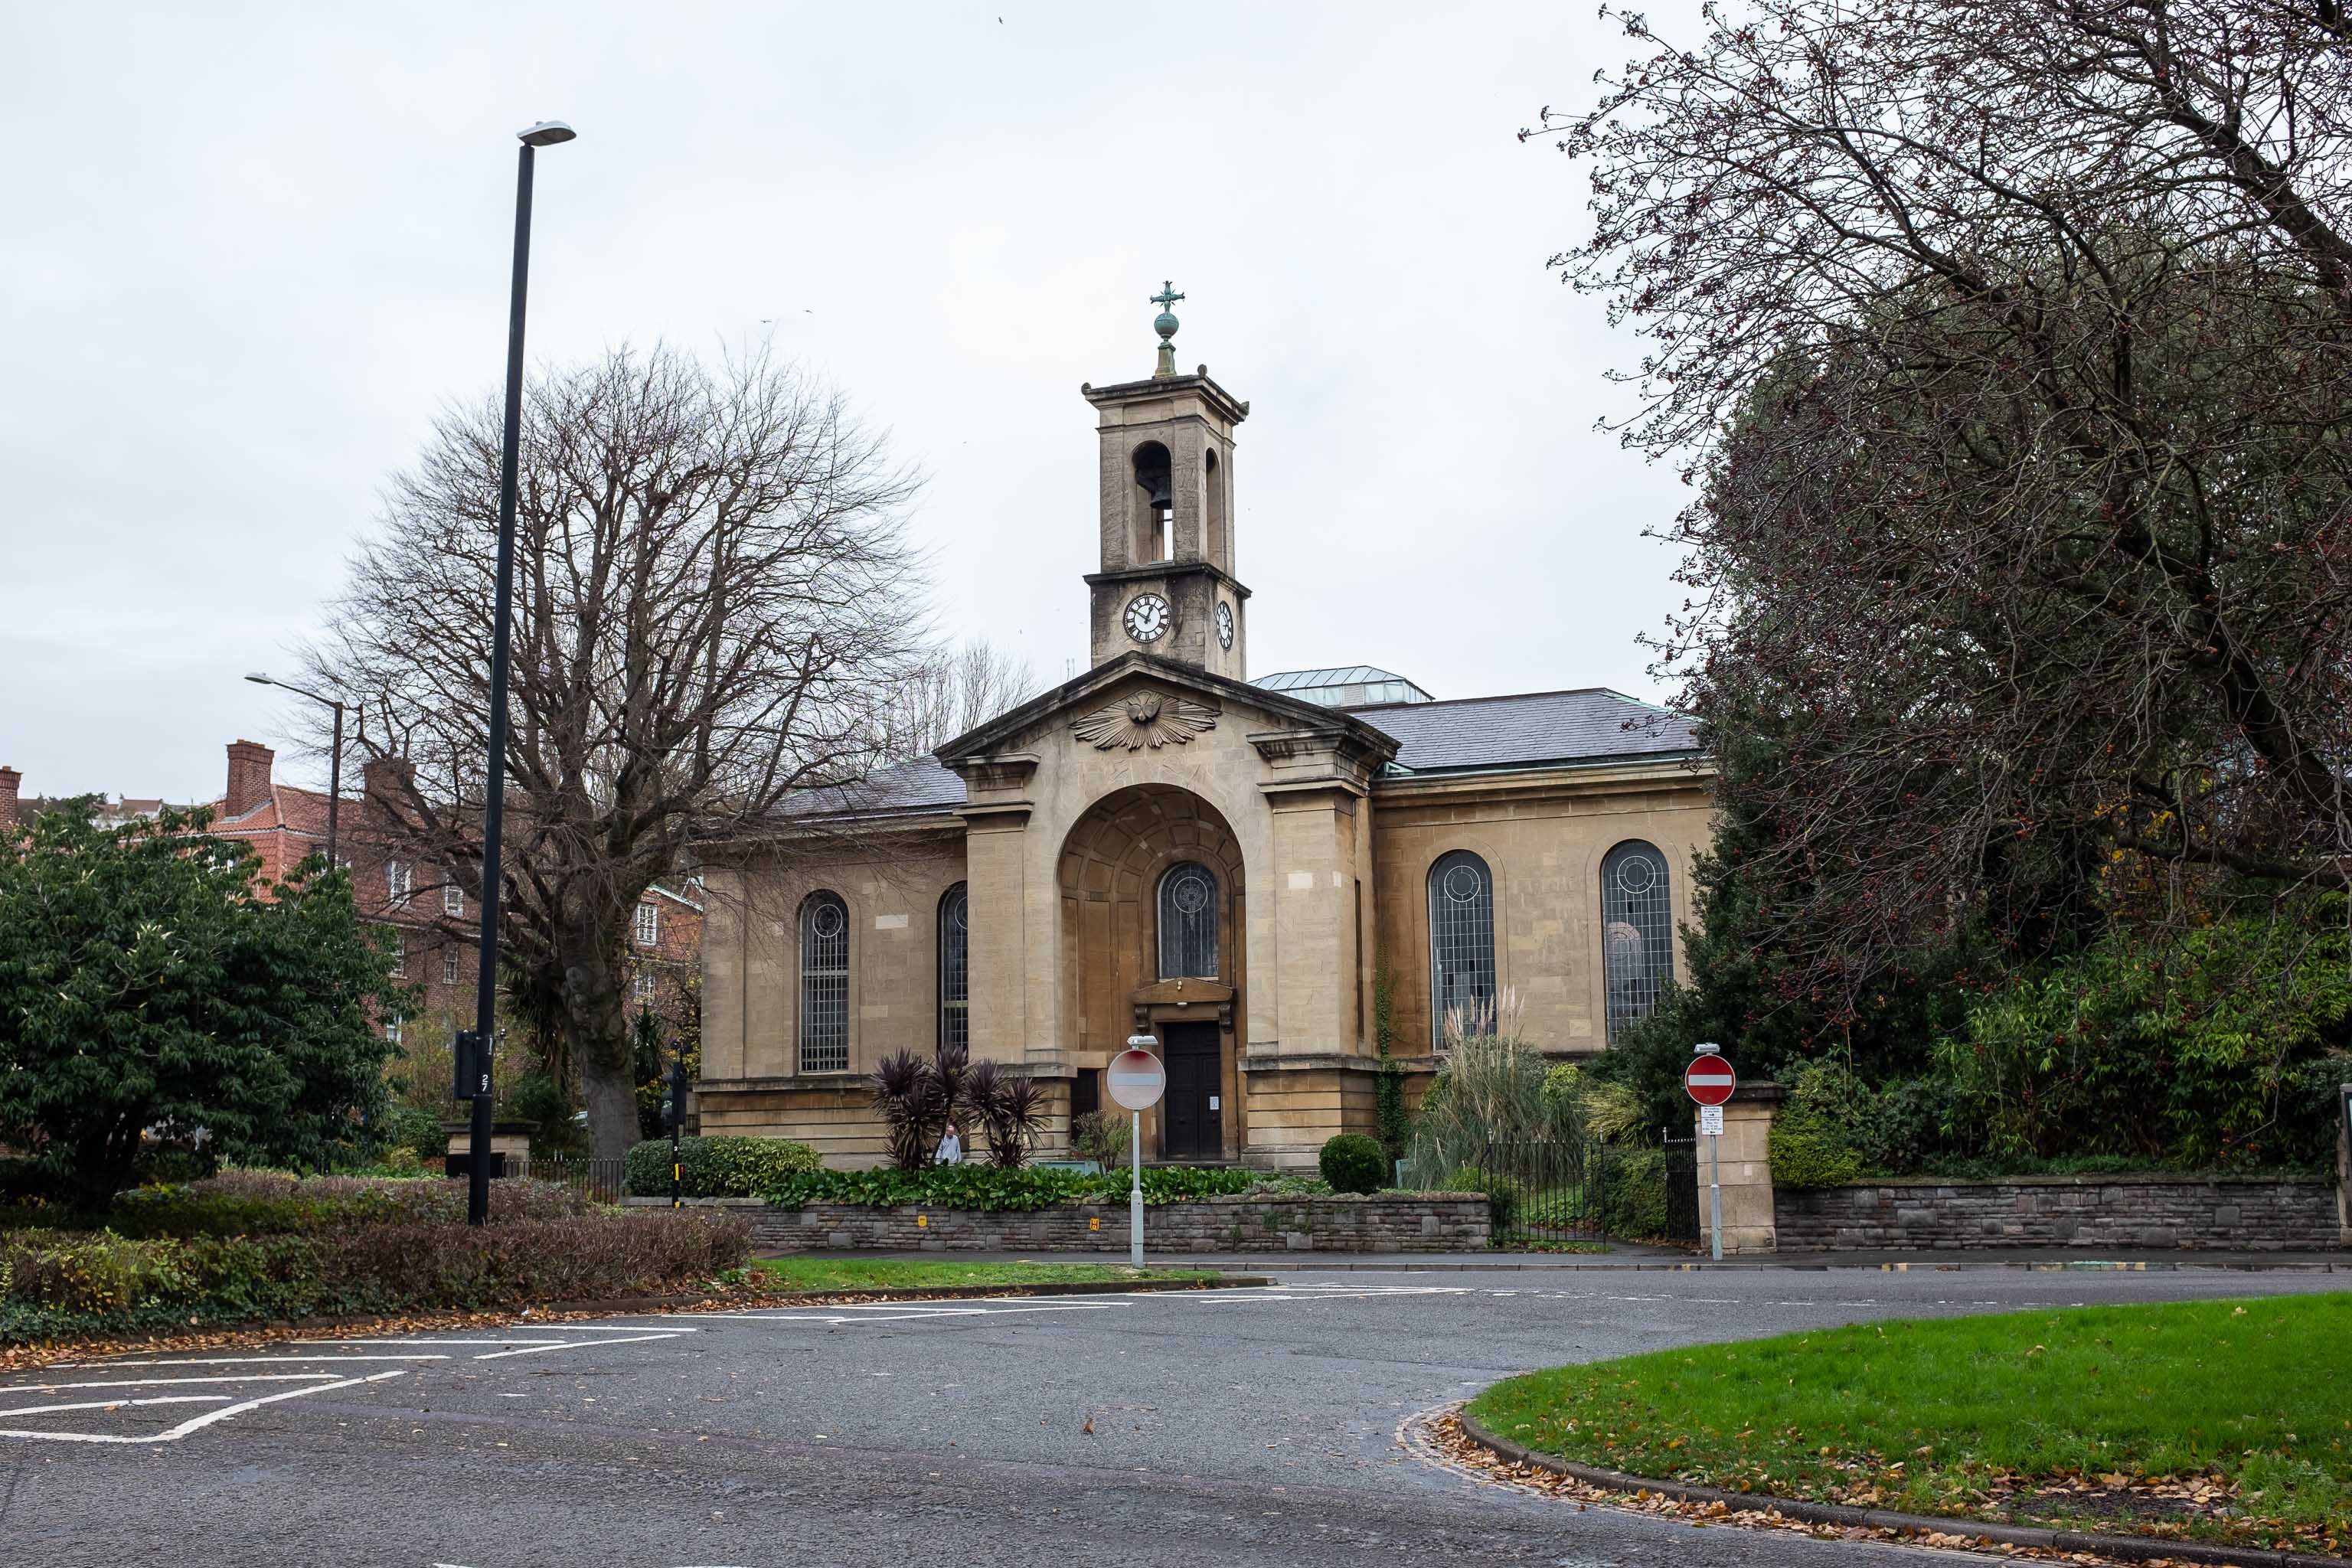 The Bells
This year there's been a little contoversy about the bells at Holy Trinity. They used to ring on the hour, every hour. I think the general stress o...